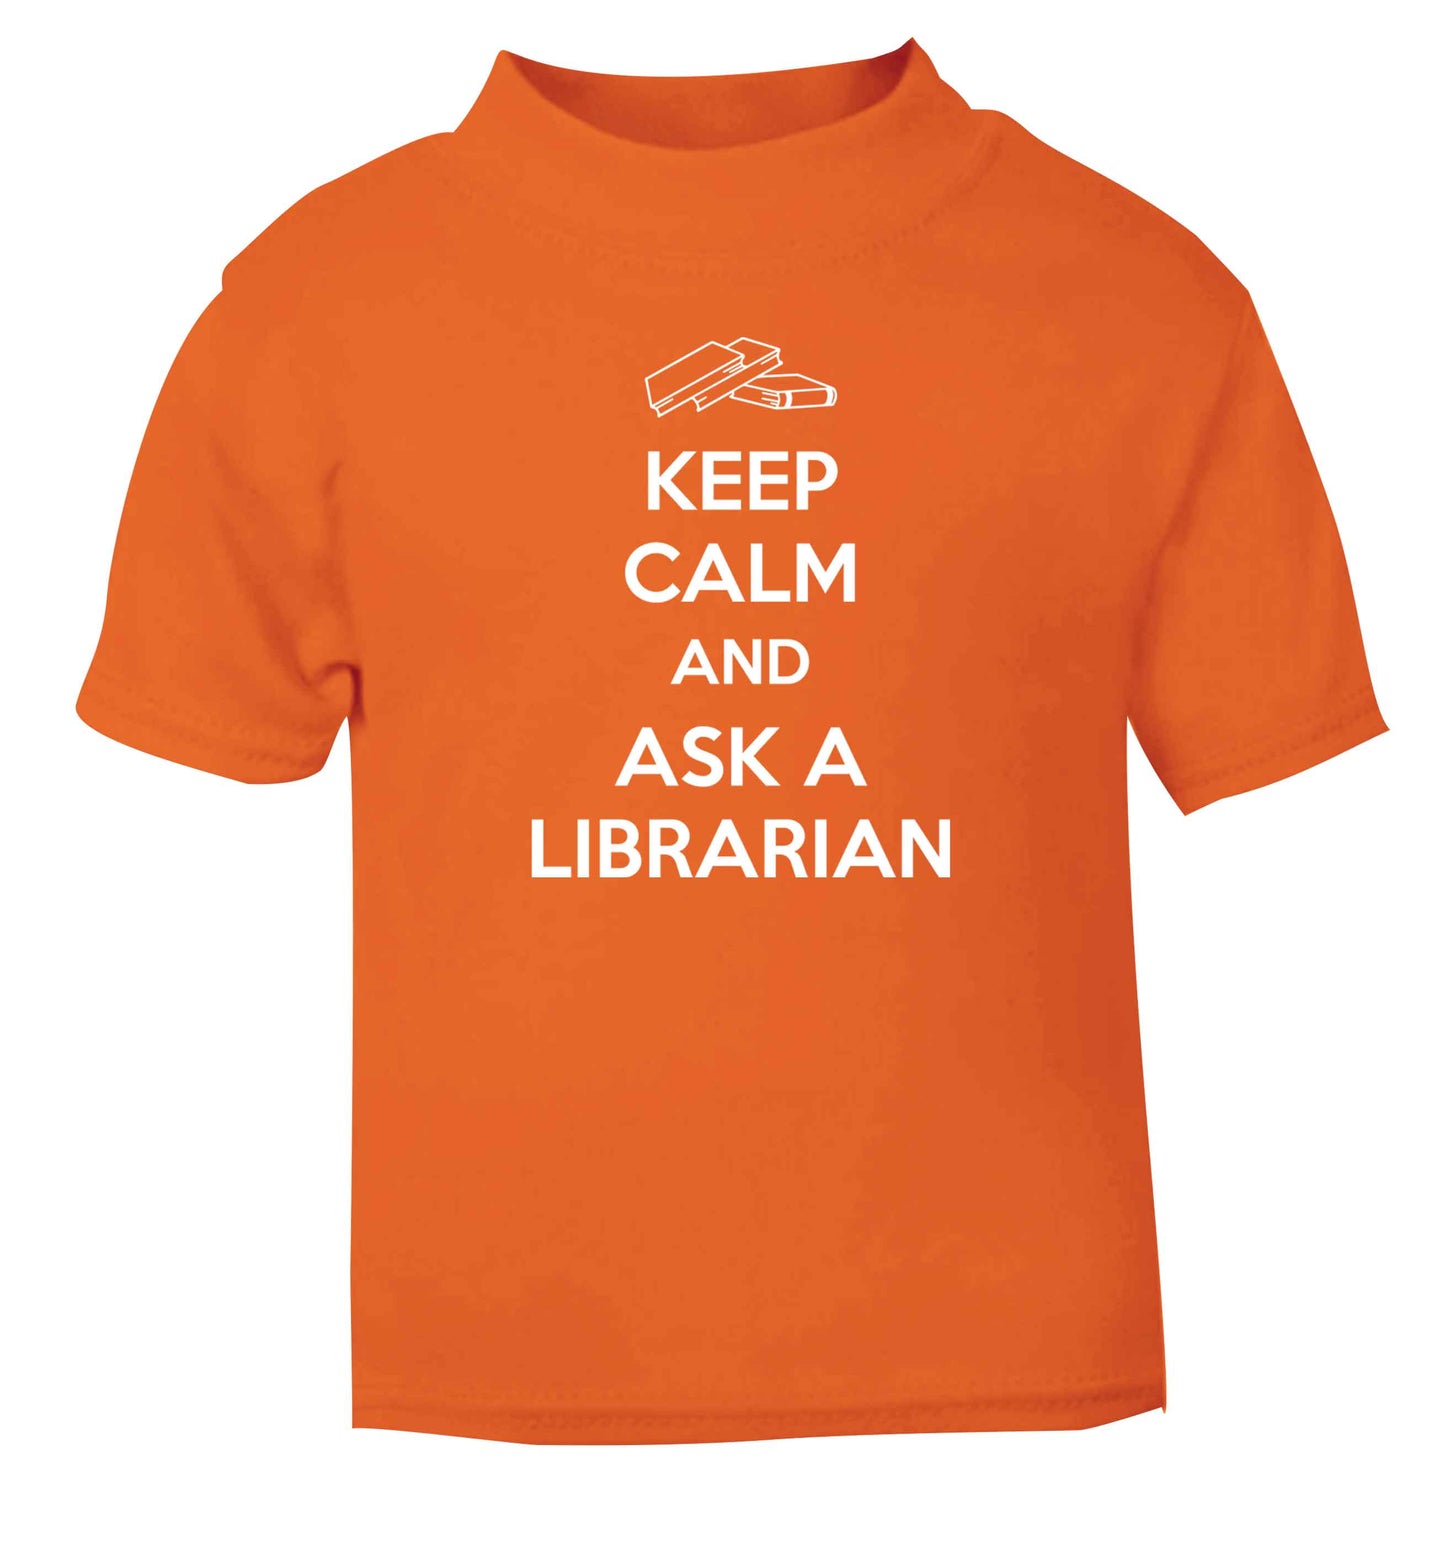 Keep calm and ask a librarian orange Baby Toddler Tshirt 2 Years